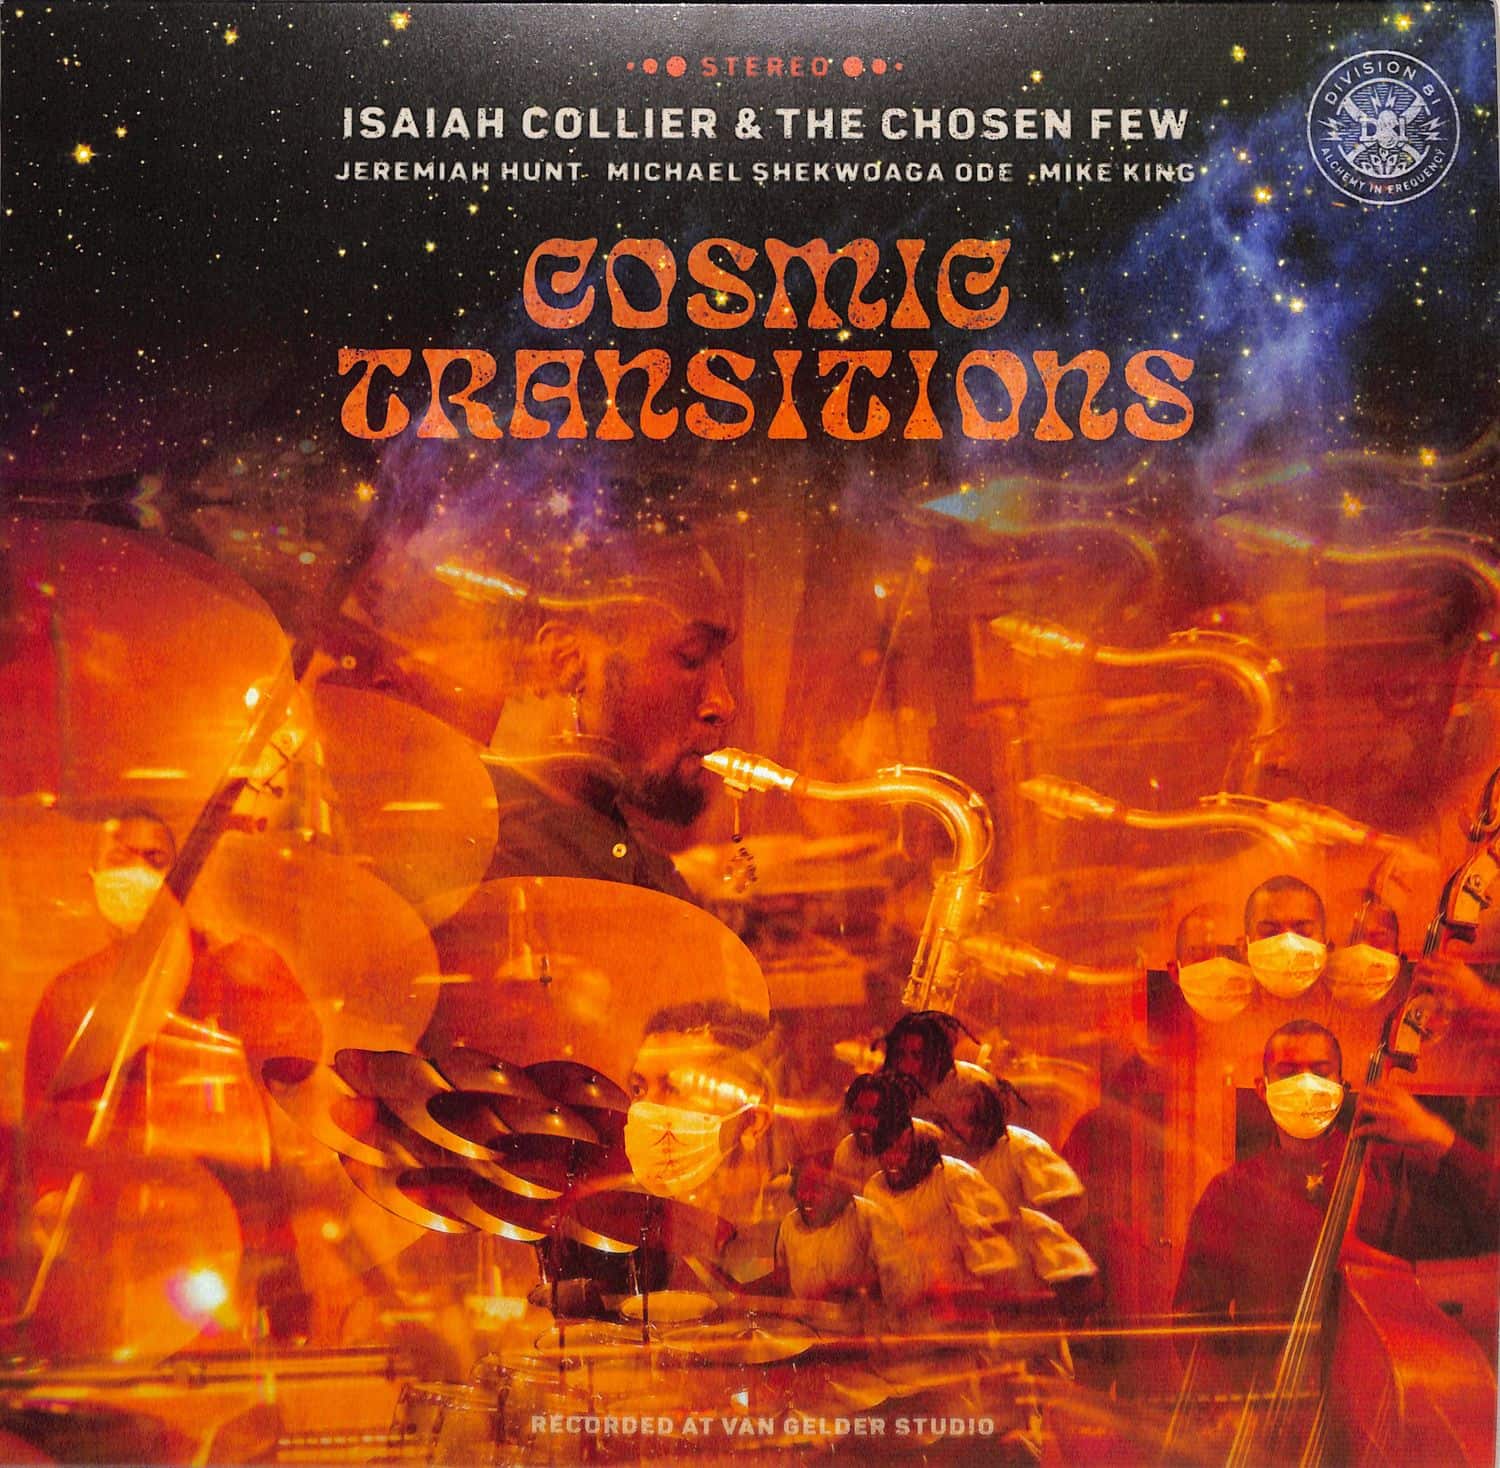 Isaiah Collier & The Chosen Few - COSMIC TRANSITIONS 